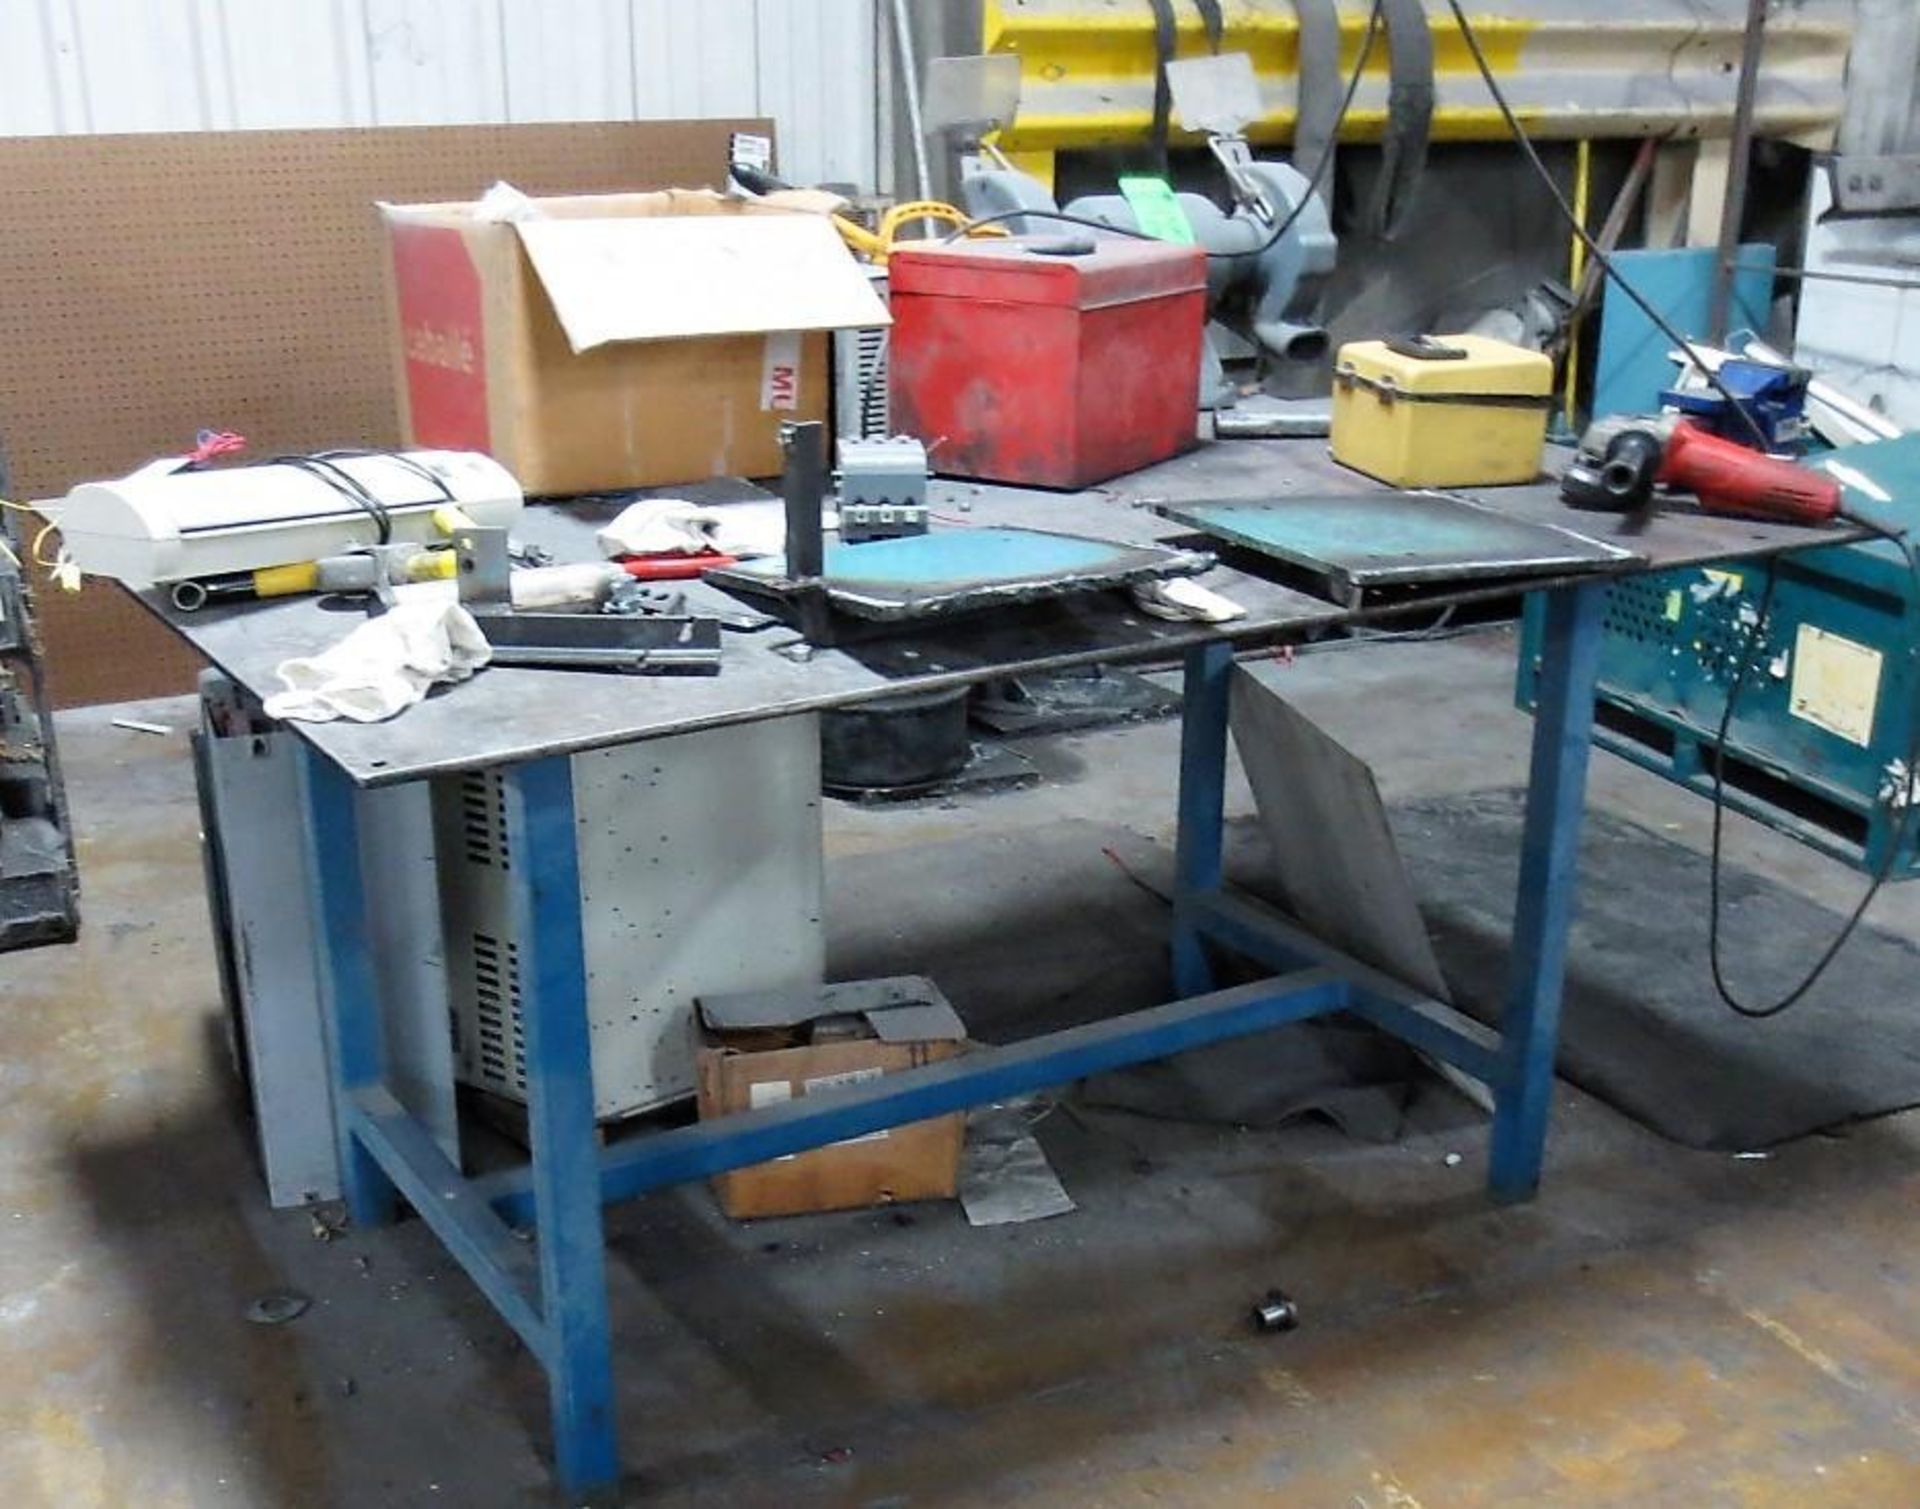 6' X 4' Steel Table with 4" Bench Vise and Baldor 3/4 HP Double end Grinder-No other contents are in